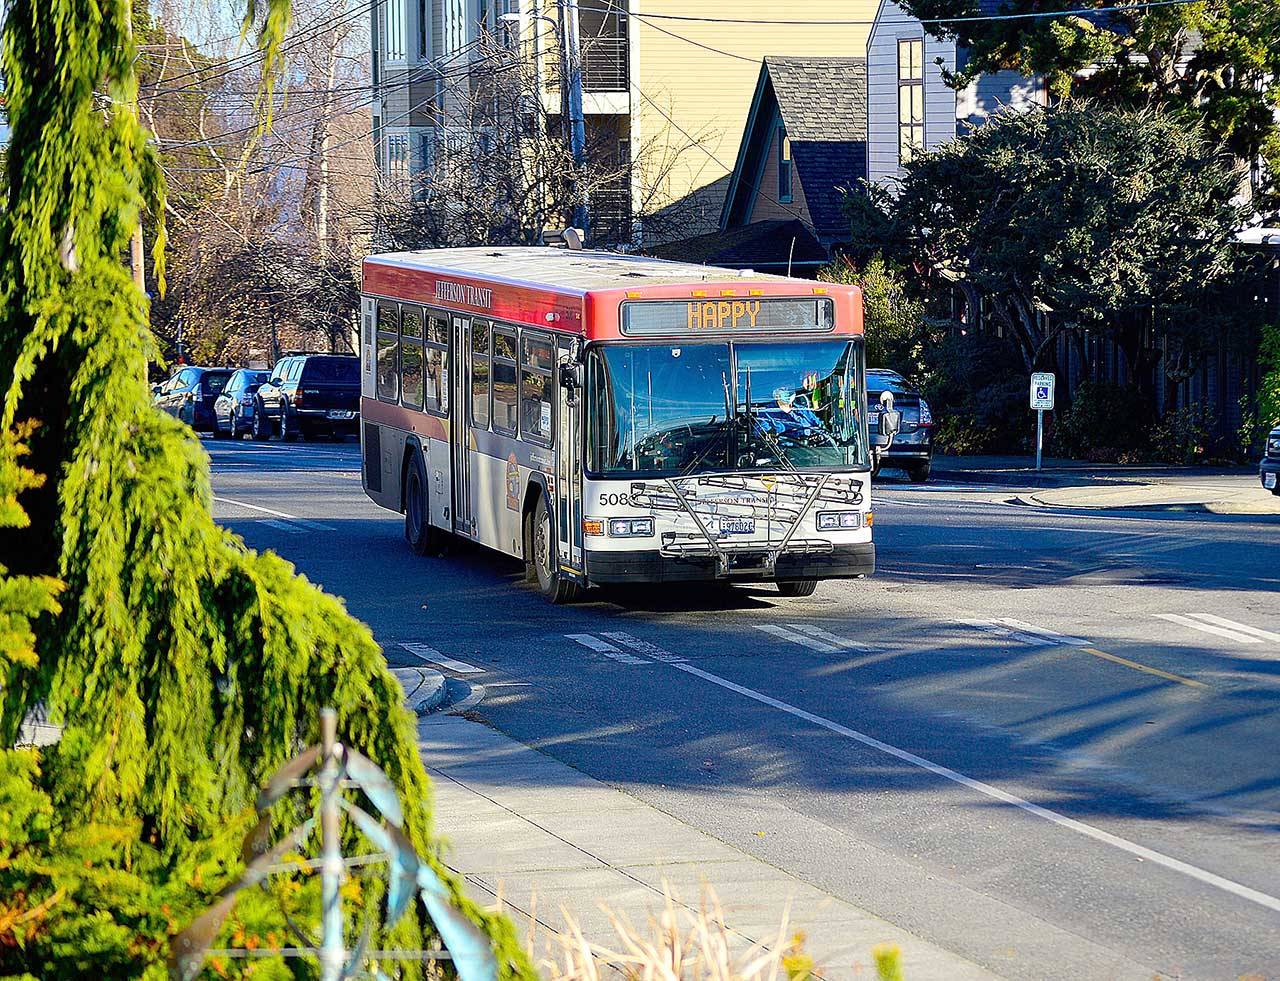 Jefferson Transit has launched a survey to assess the demand and desire for a bus connection to Kingston’s fast ferry to Seattle. (Diane Urbani de la Paz/Peninsula Daily News)